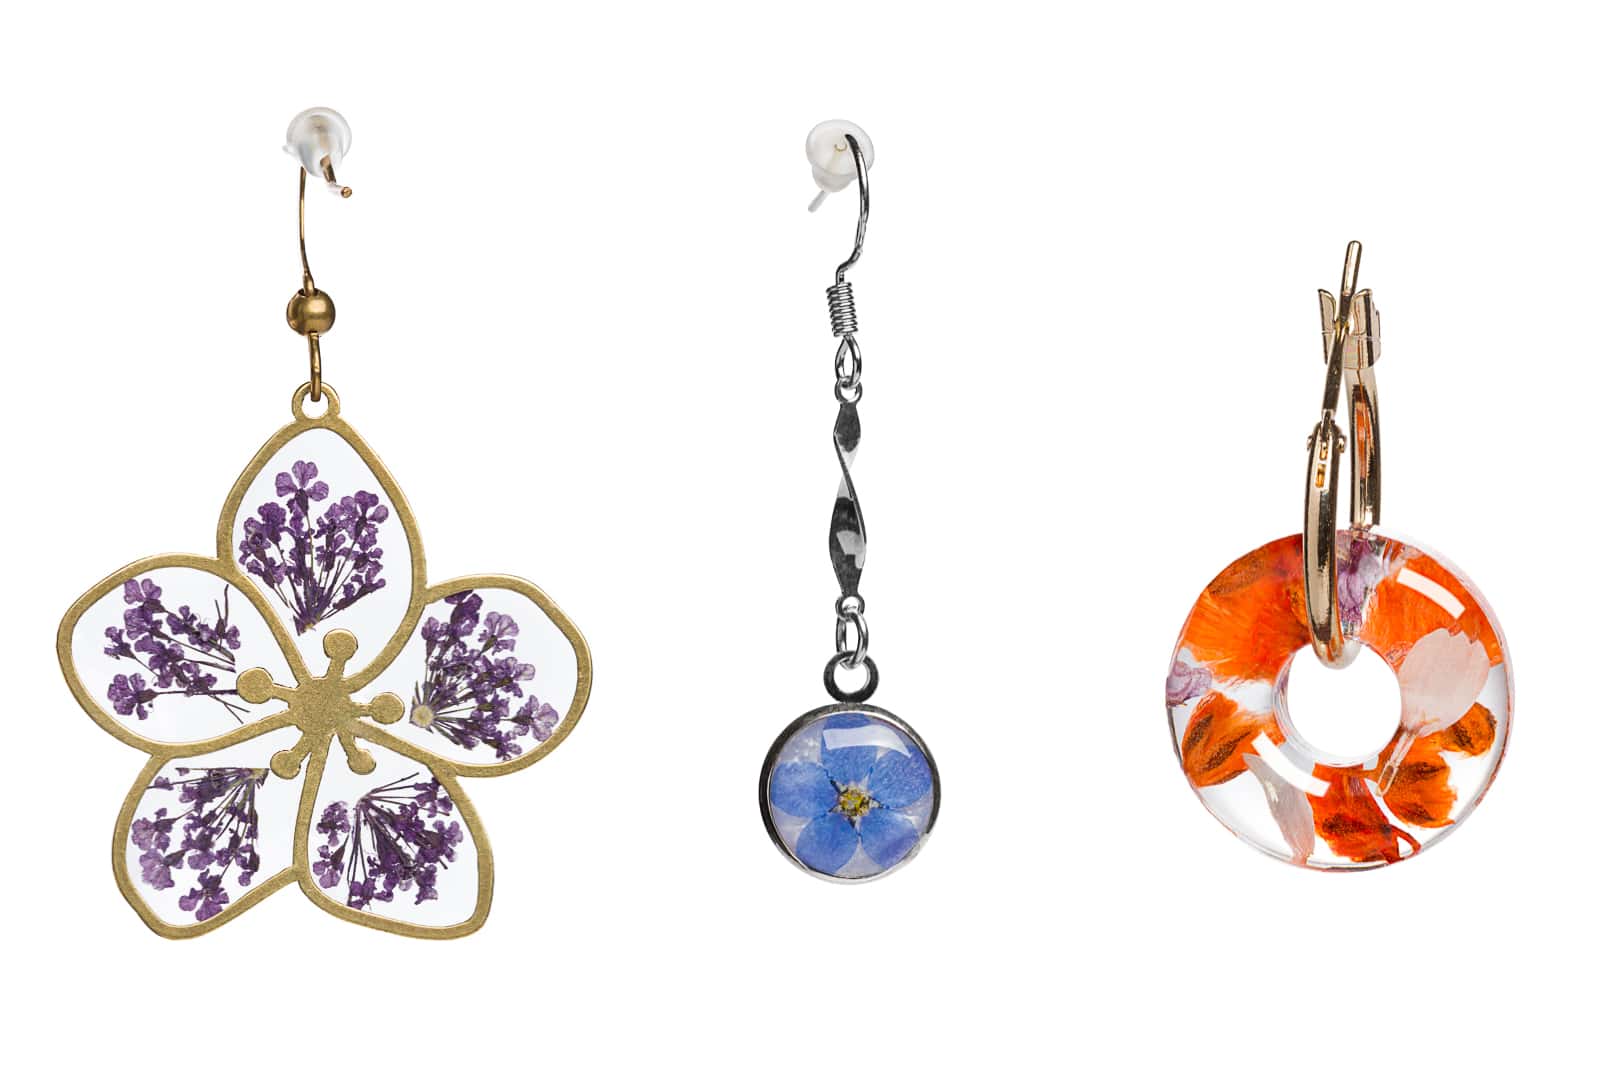 three different styles of resin encapsulated earrings by petal and plume